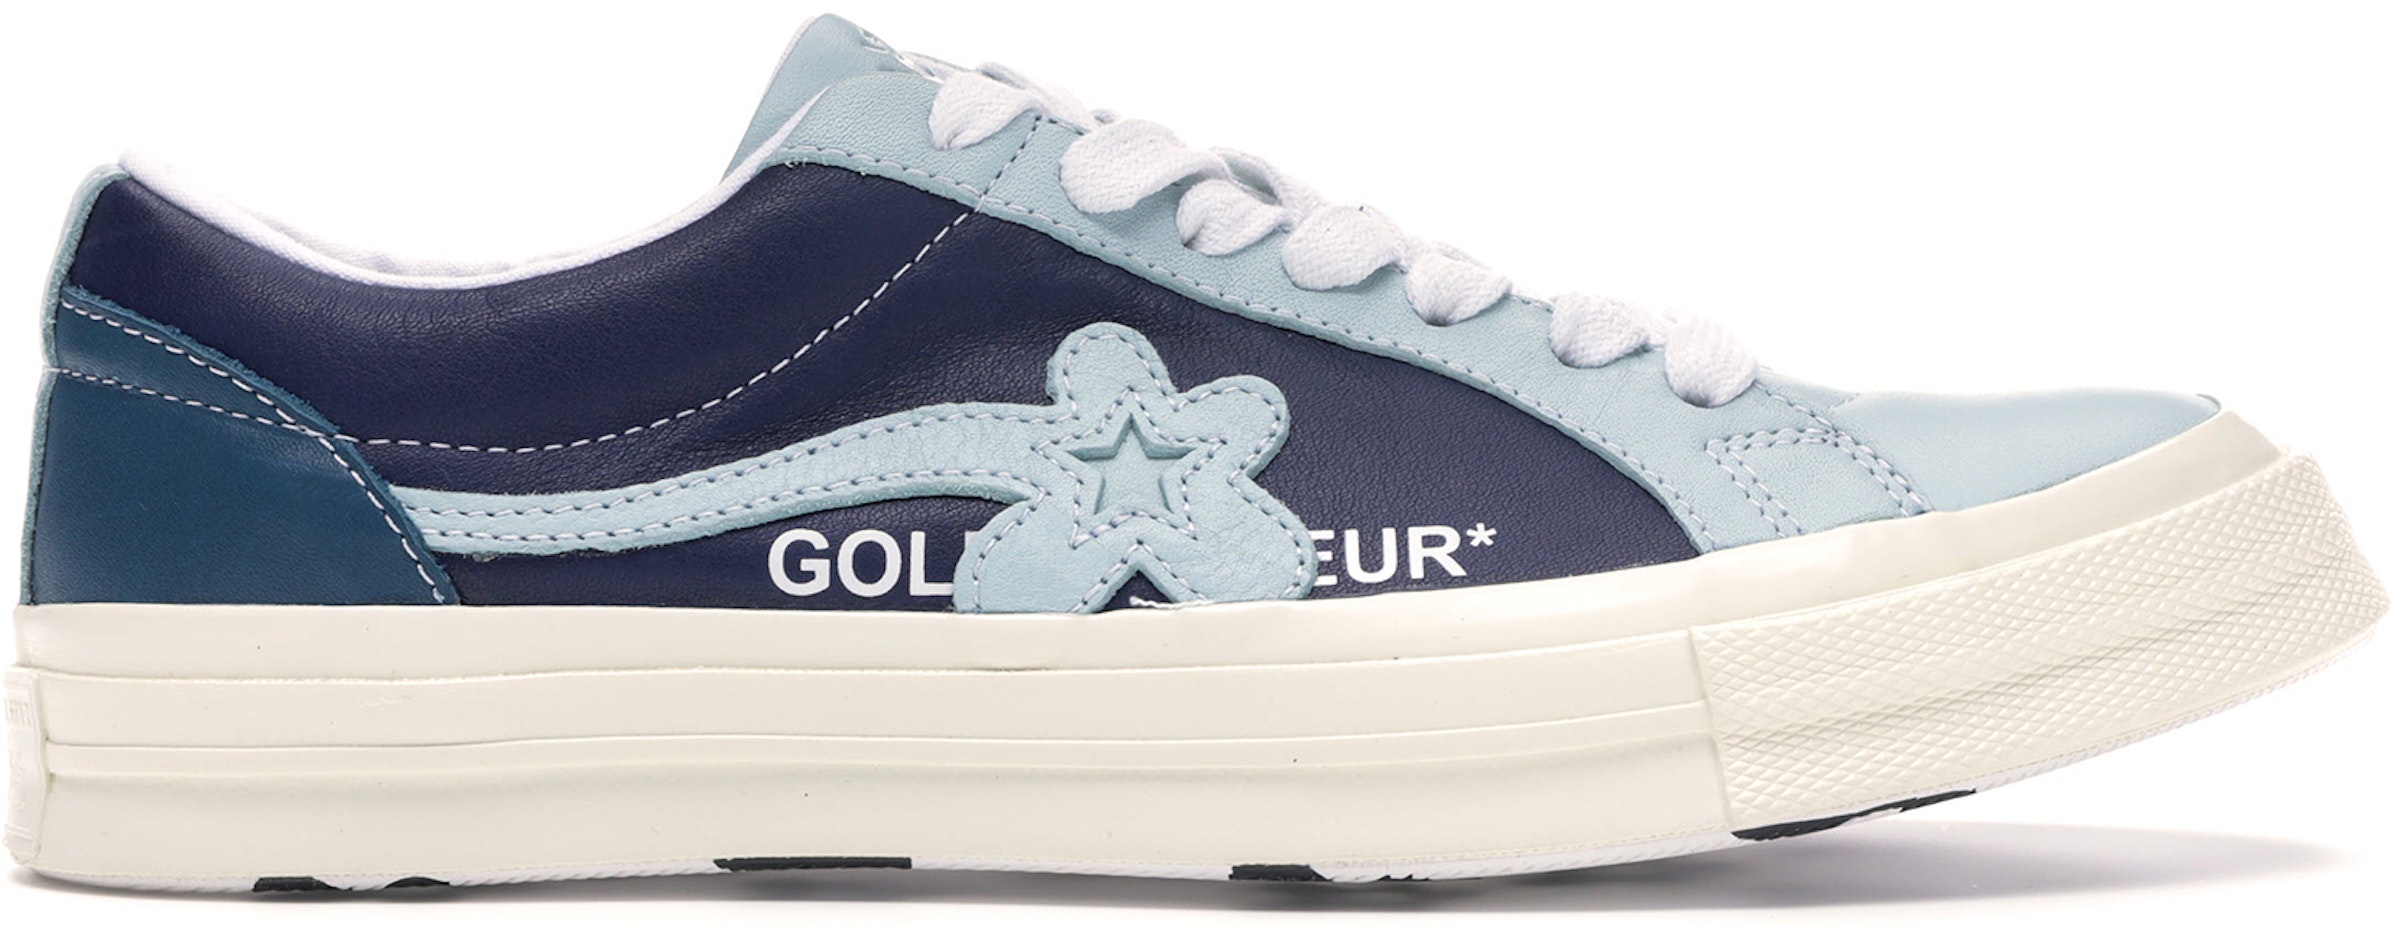 Converse One Star Ox Golf Le Pack Blue Men's - 164024C - US